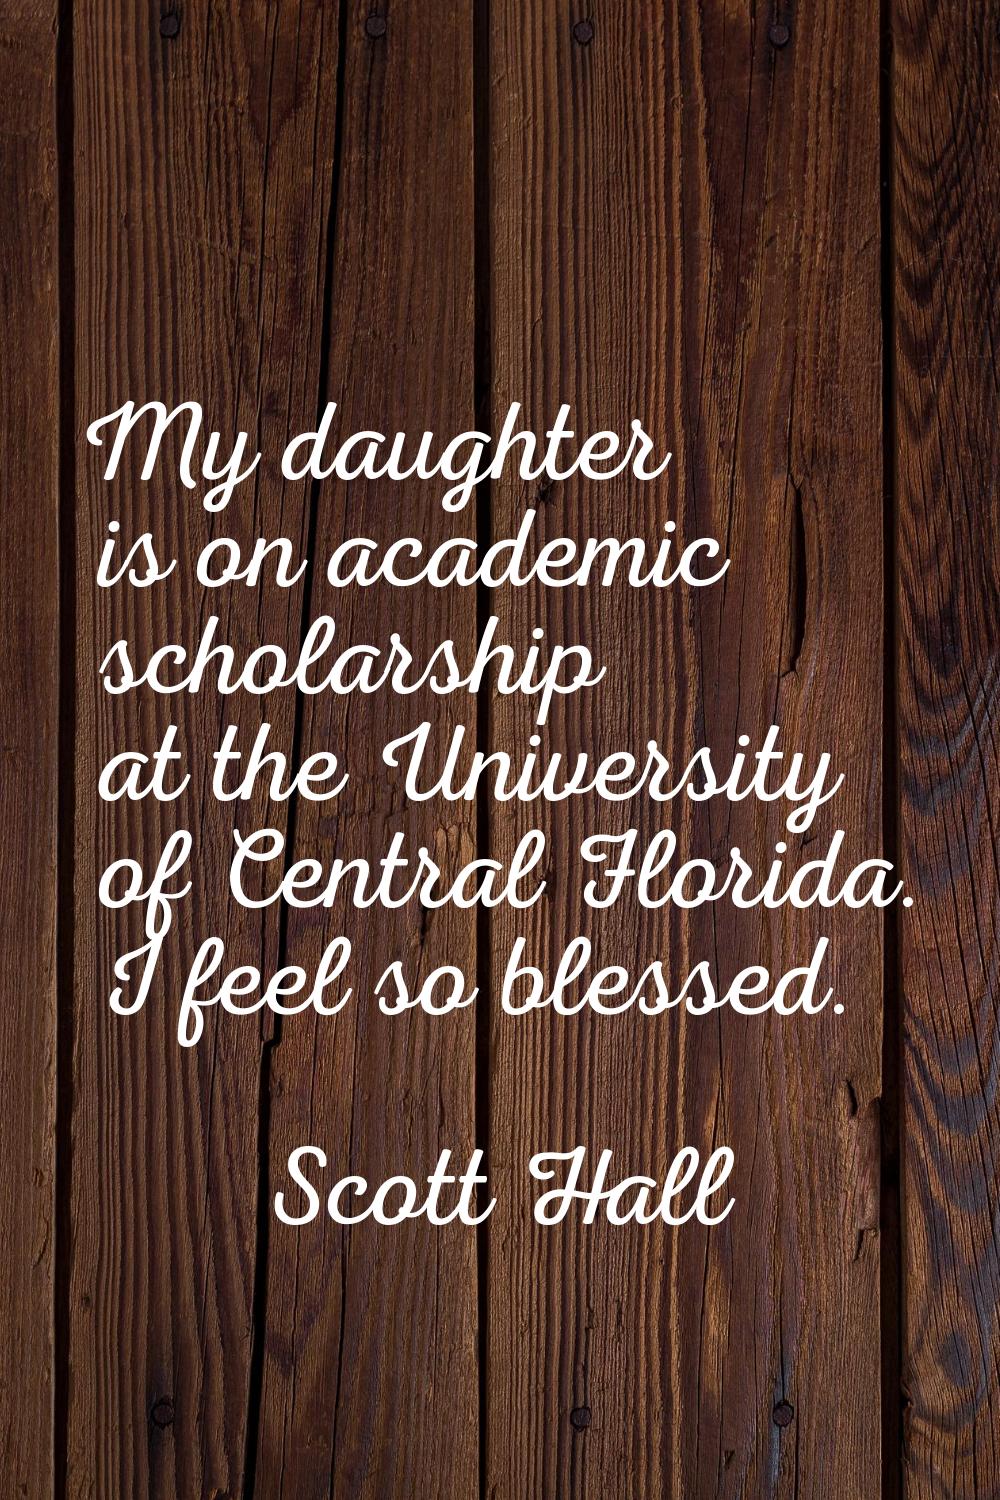 My daughter is on academic scholarship at the University of Central Florida. I feel so blessed.